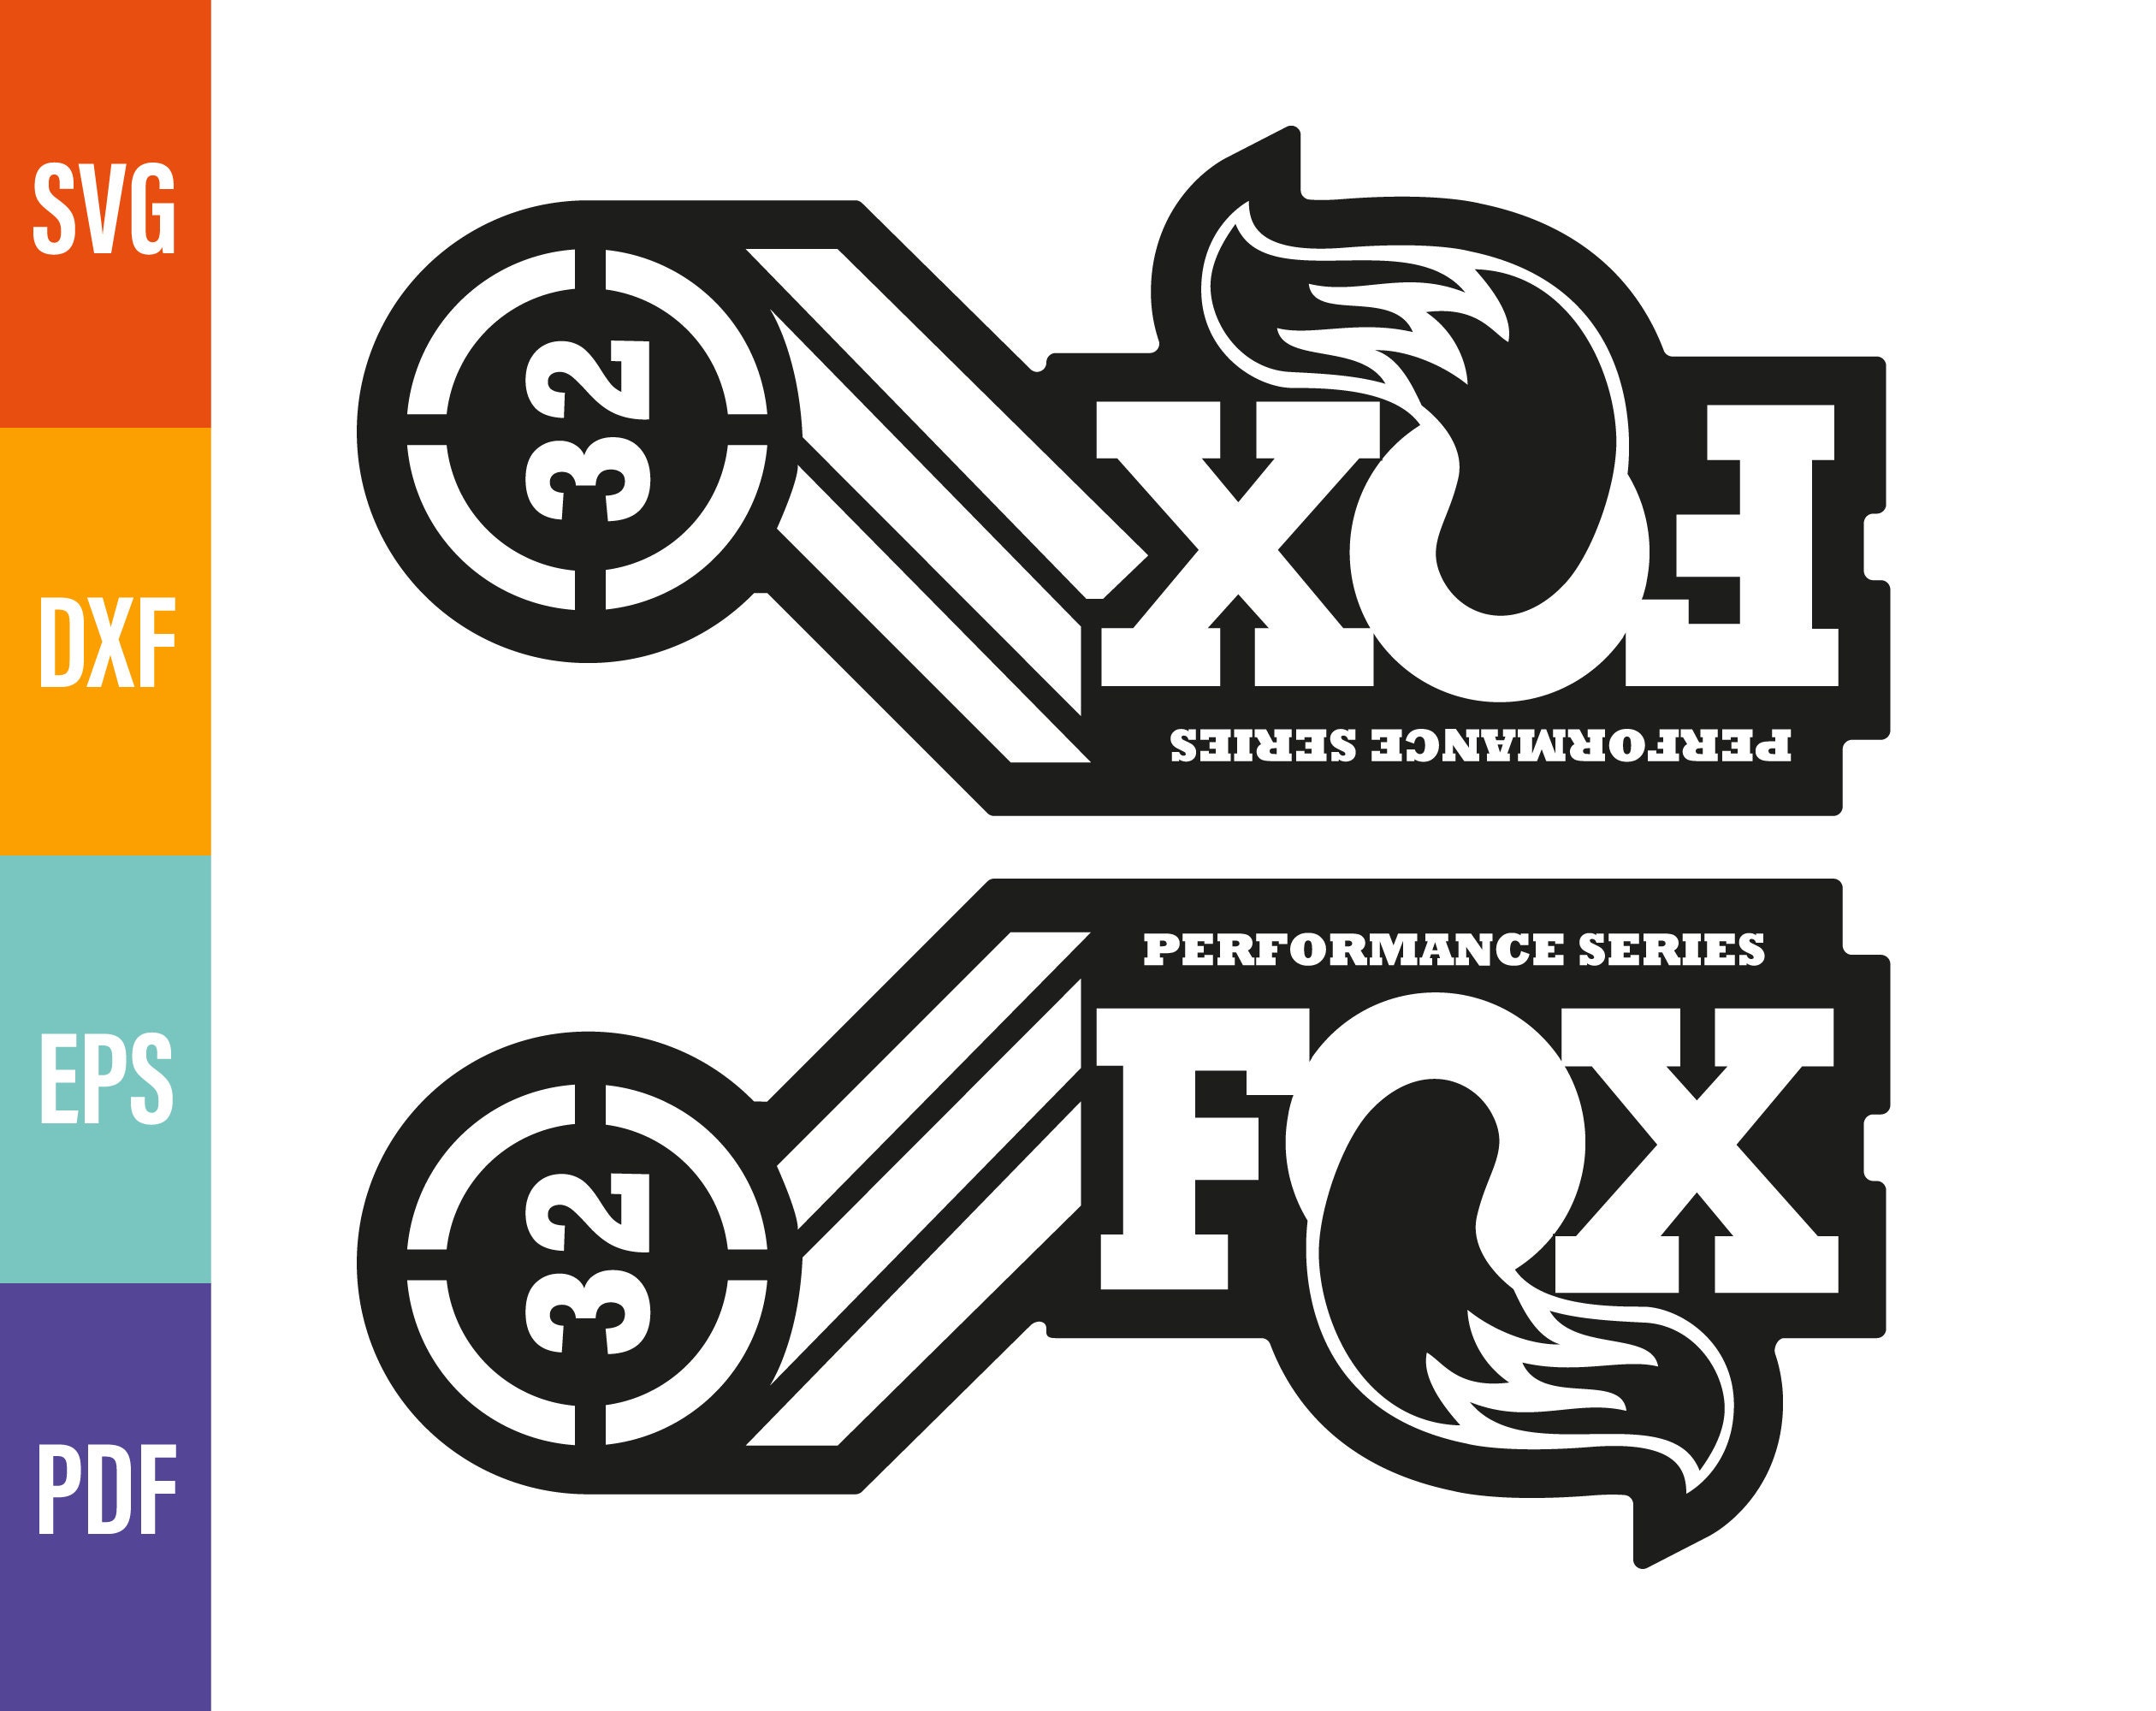 Fox Racing Wrench Decal Svg Png online in USA